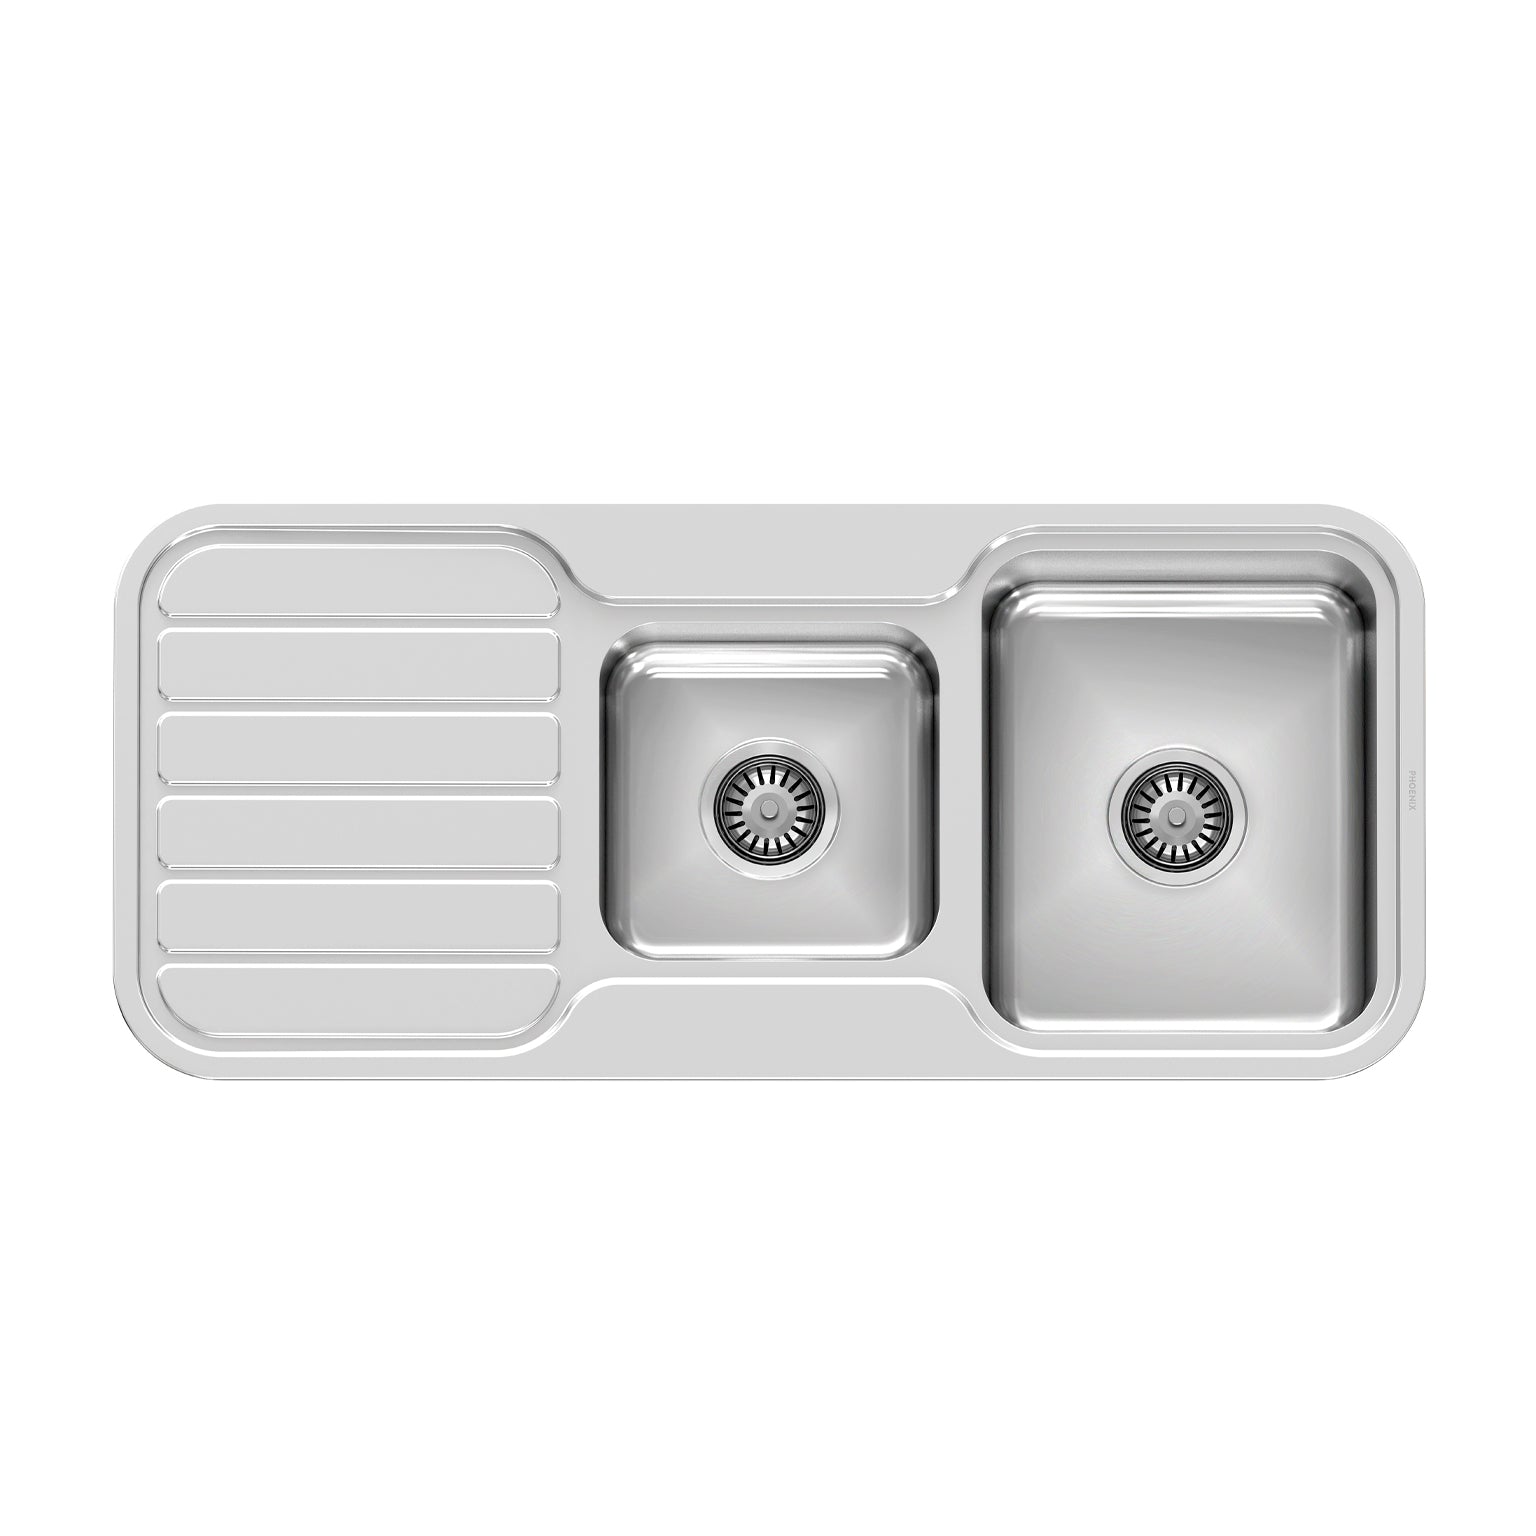 PHOENIX 1000 SERIES 1 AND 3/4 BOWL SINK WITH DRAINER AND NO TAPHOLE 1080MM